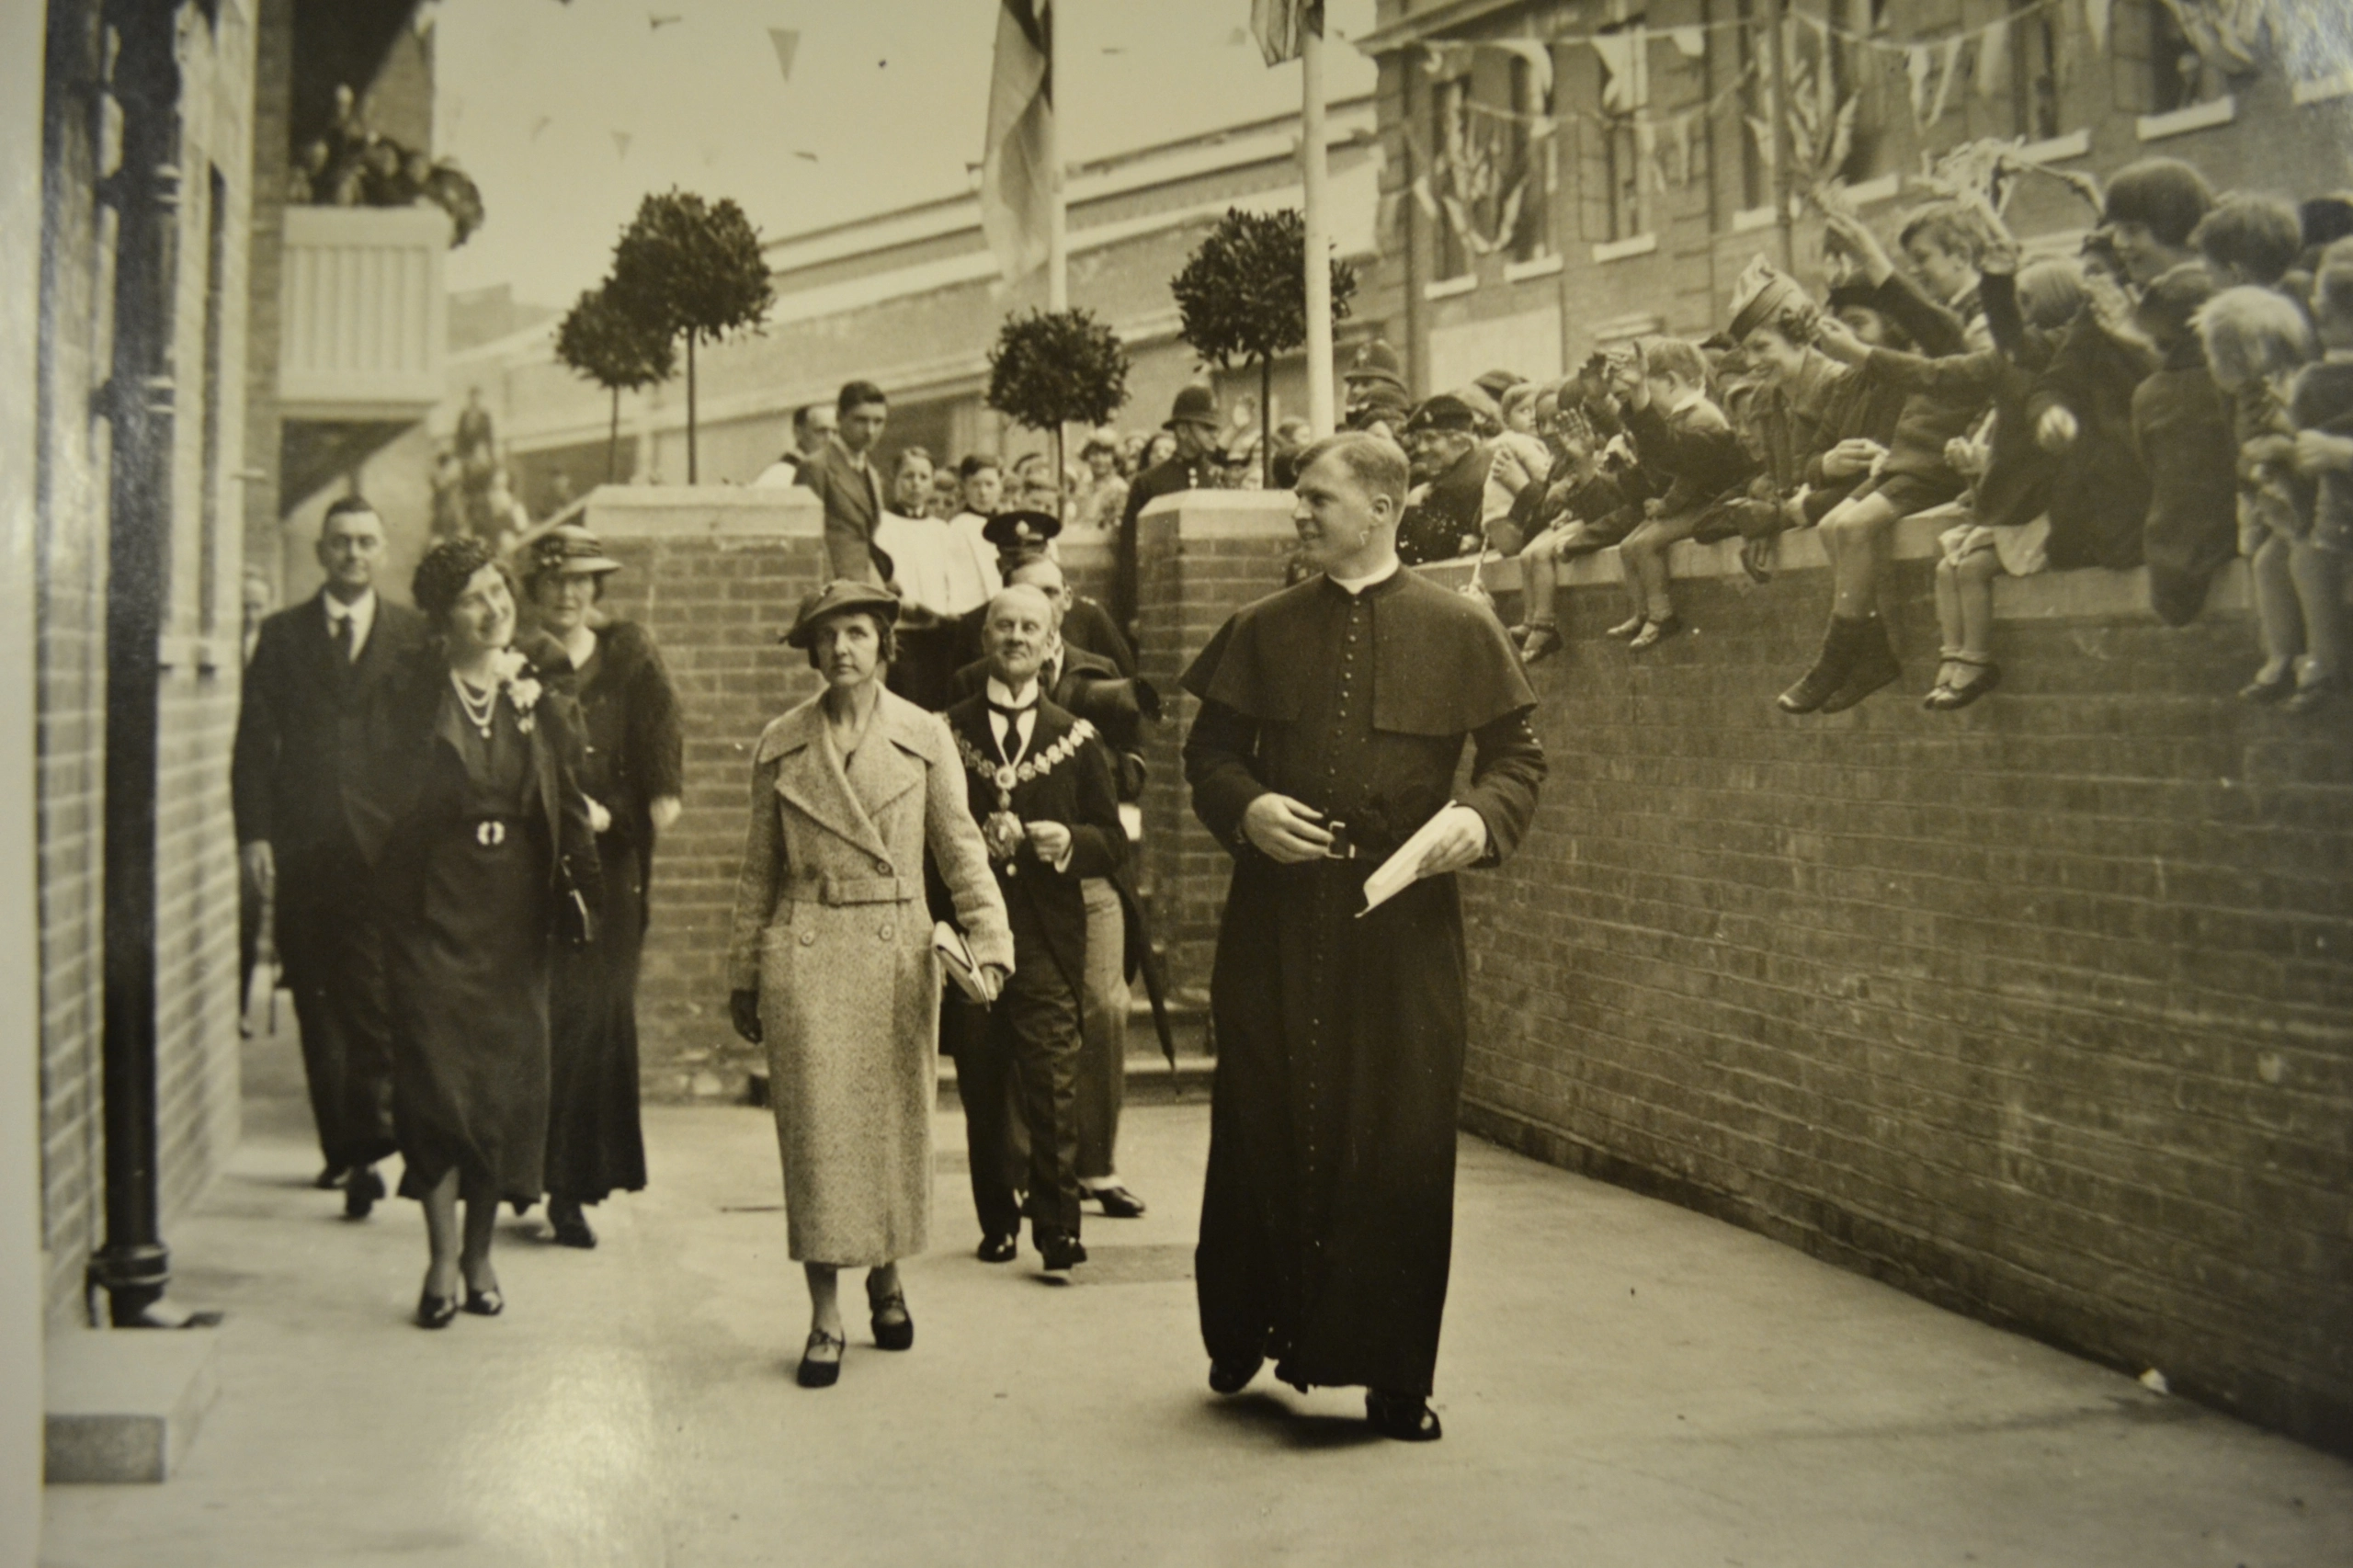 Father Scott takes the Duchess and Irene Barclay to inspect the new St Joseph's flats, 14 May 1936